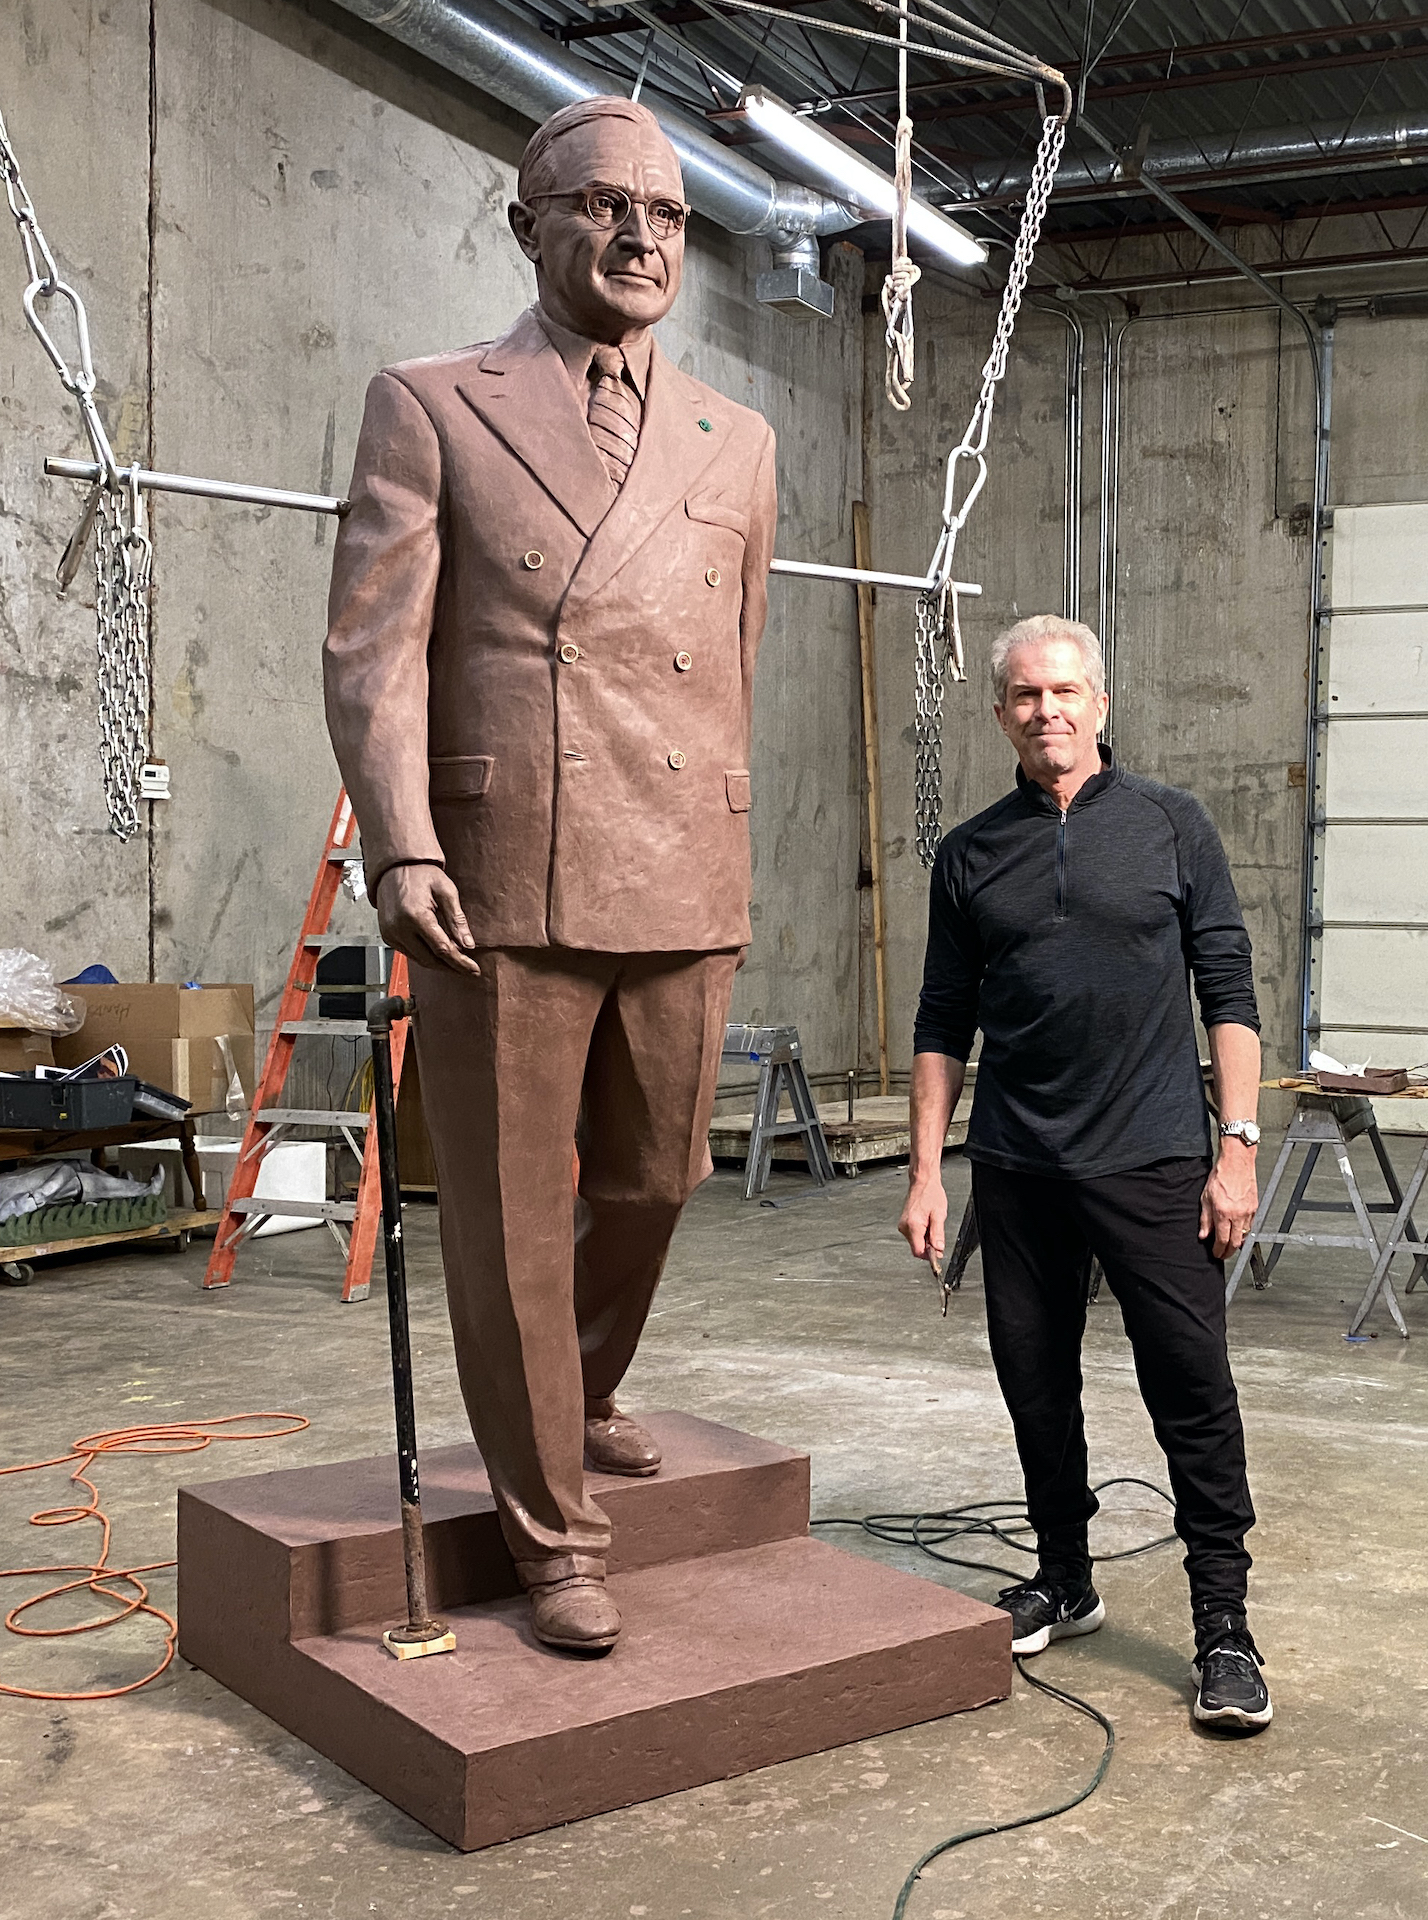 Sculptor Tom Corbin with clay statue of President Truman. The bronze statue will be installed in the Rotunda of the U.S. Capitol Building on Sept. 29.